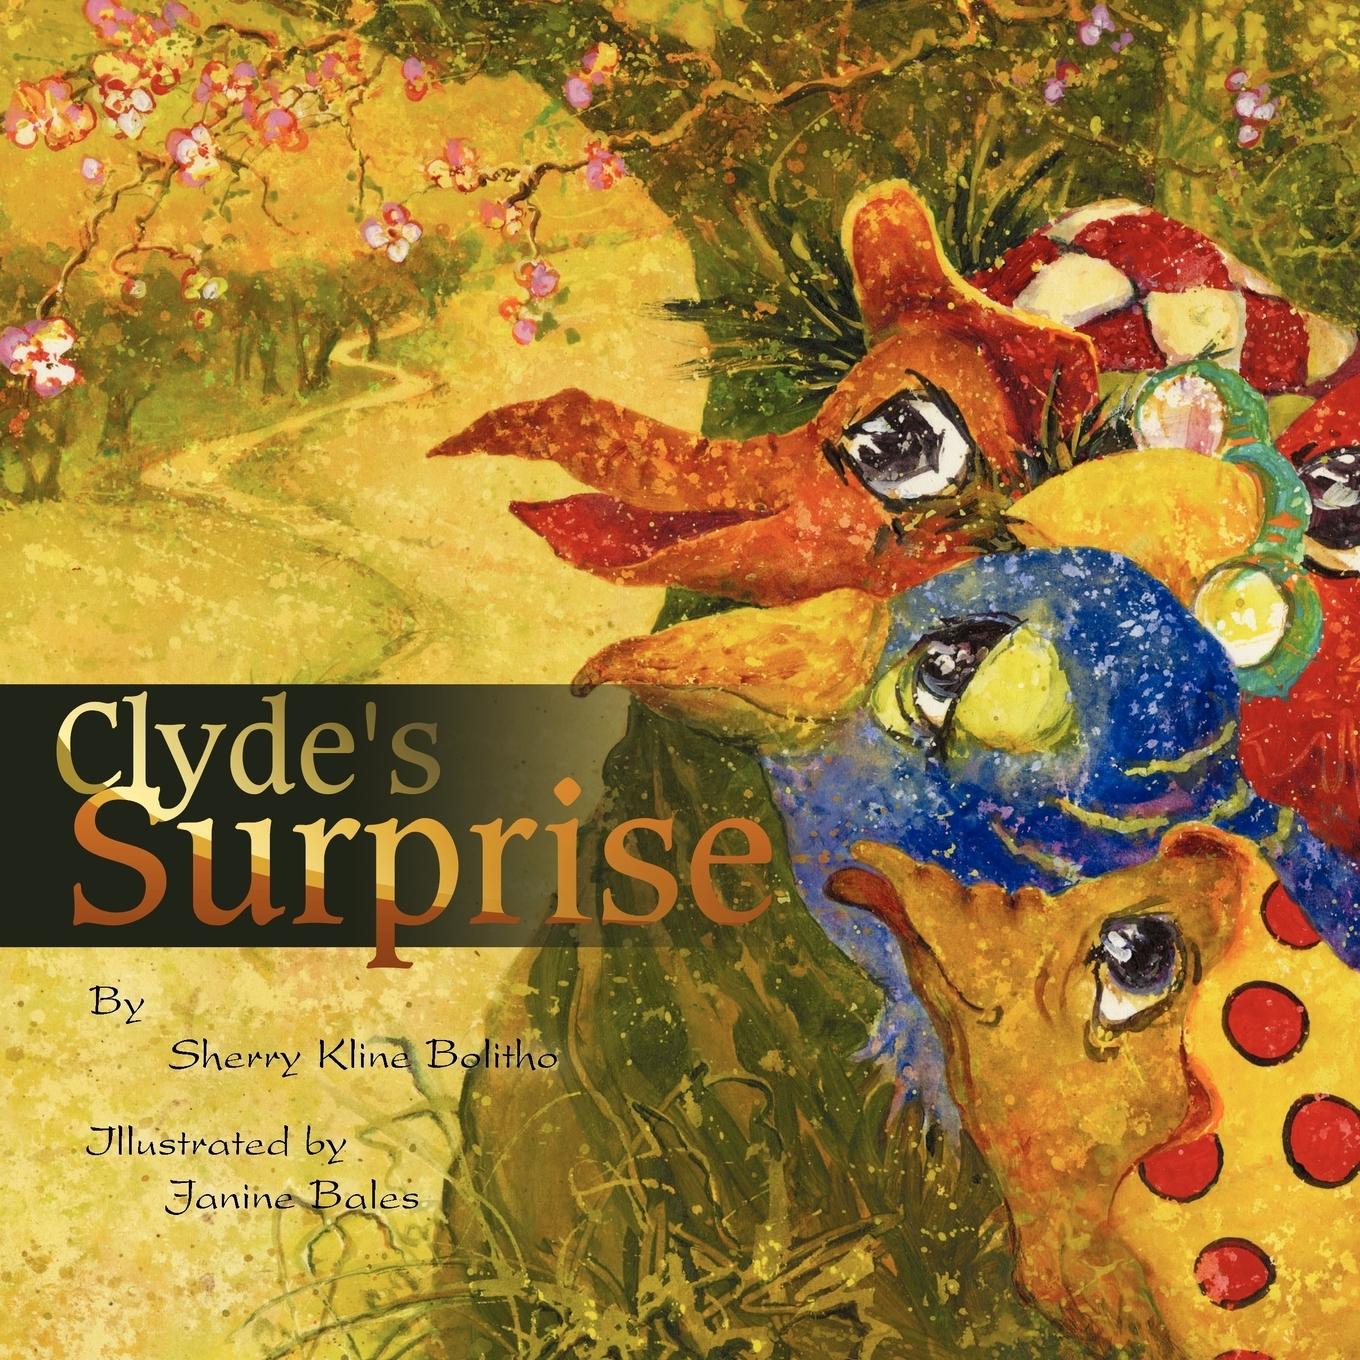 Clyde s Surprise - Bolitho, Sherry Kline